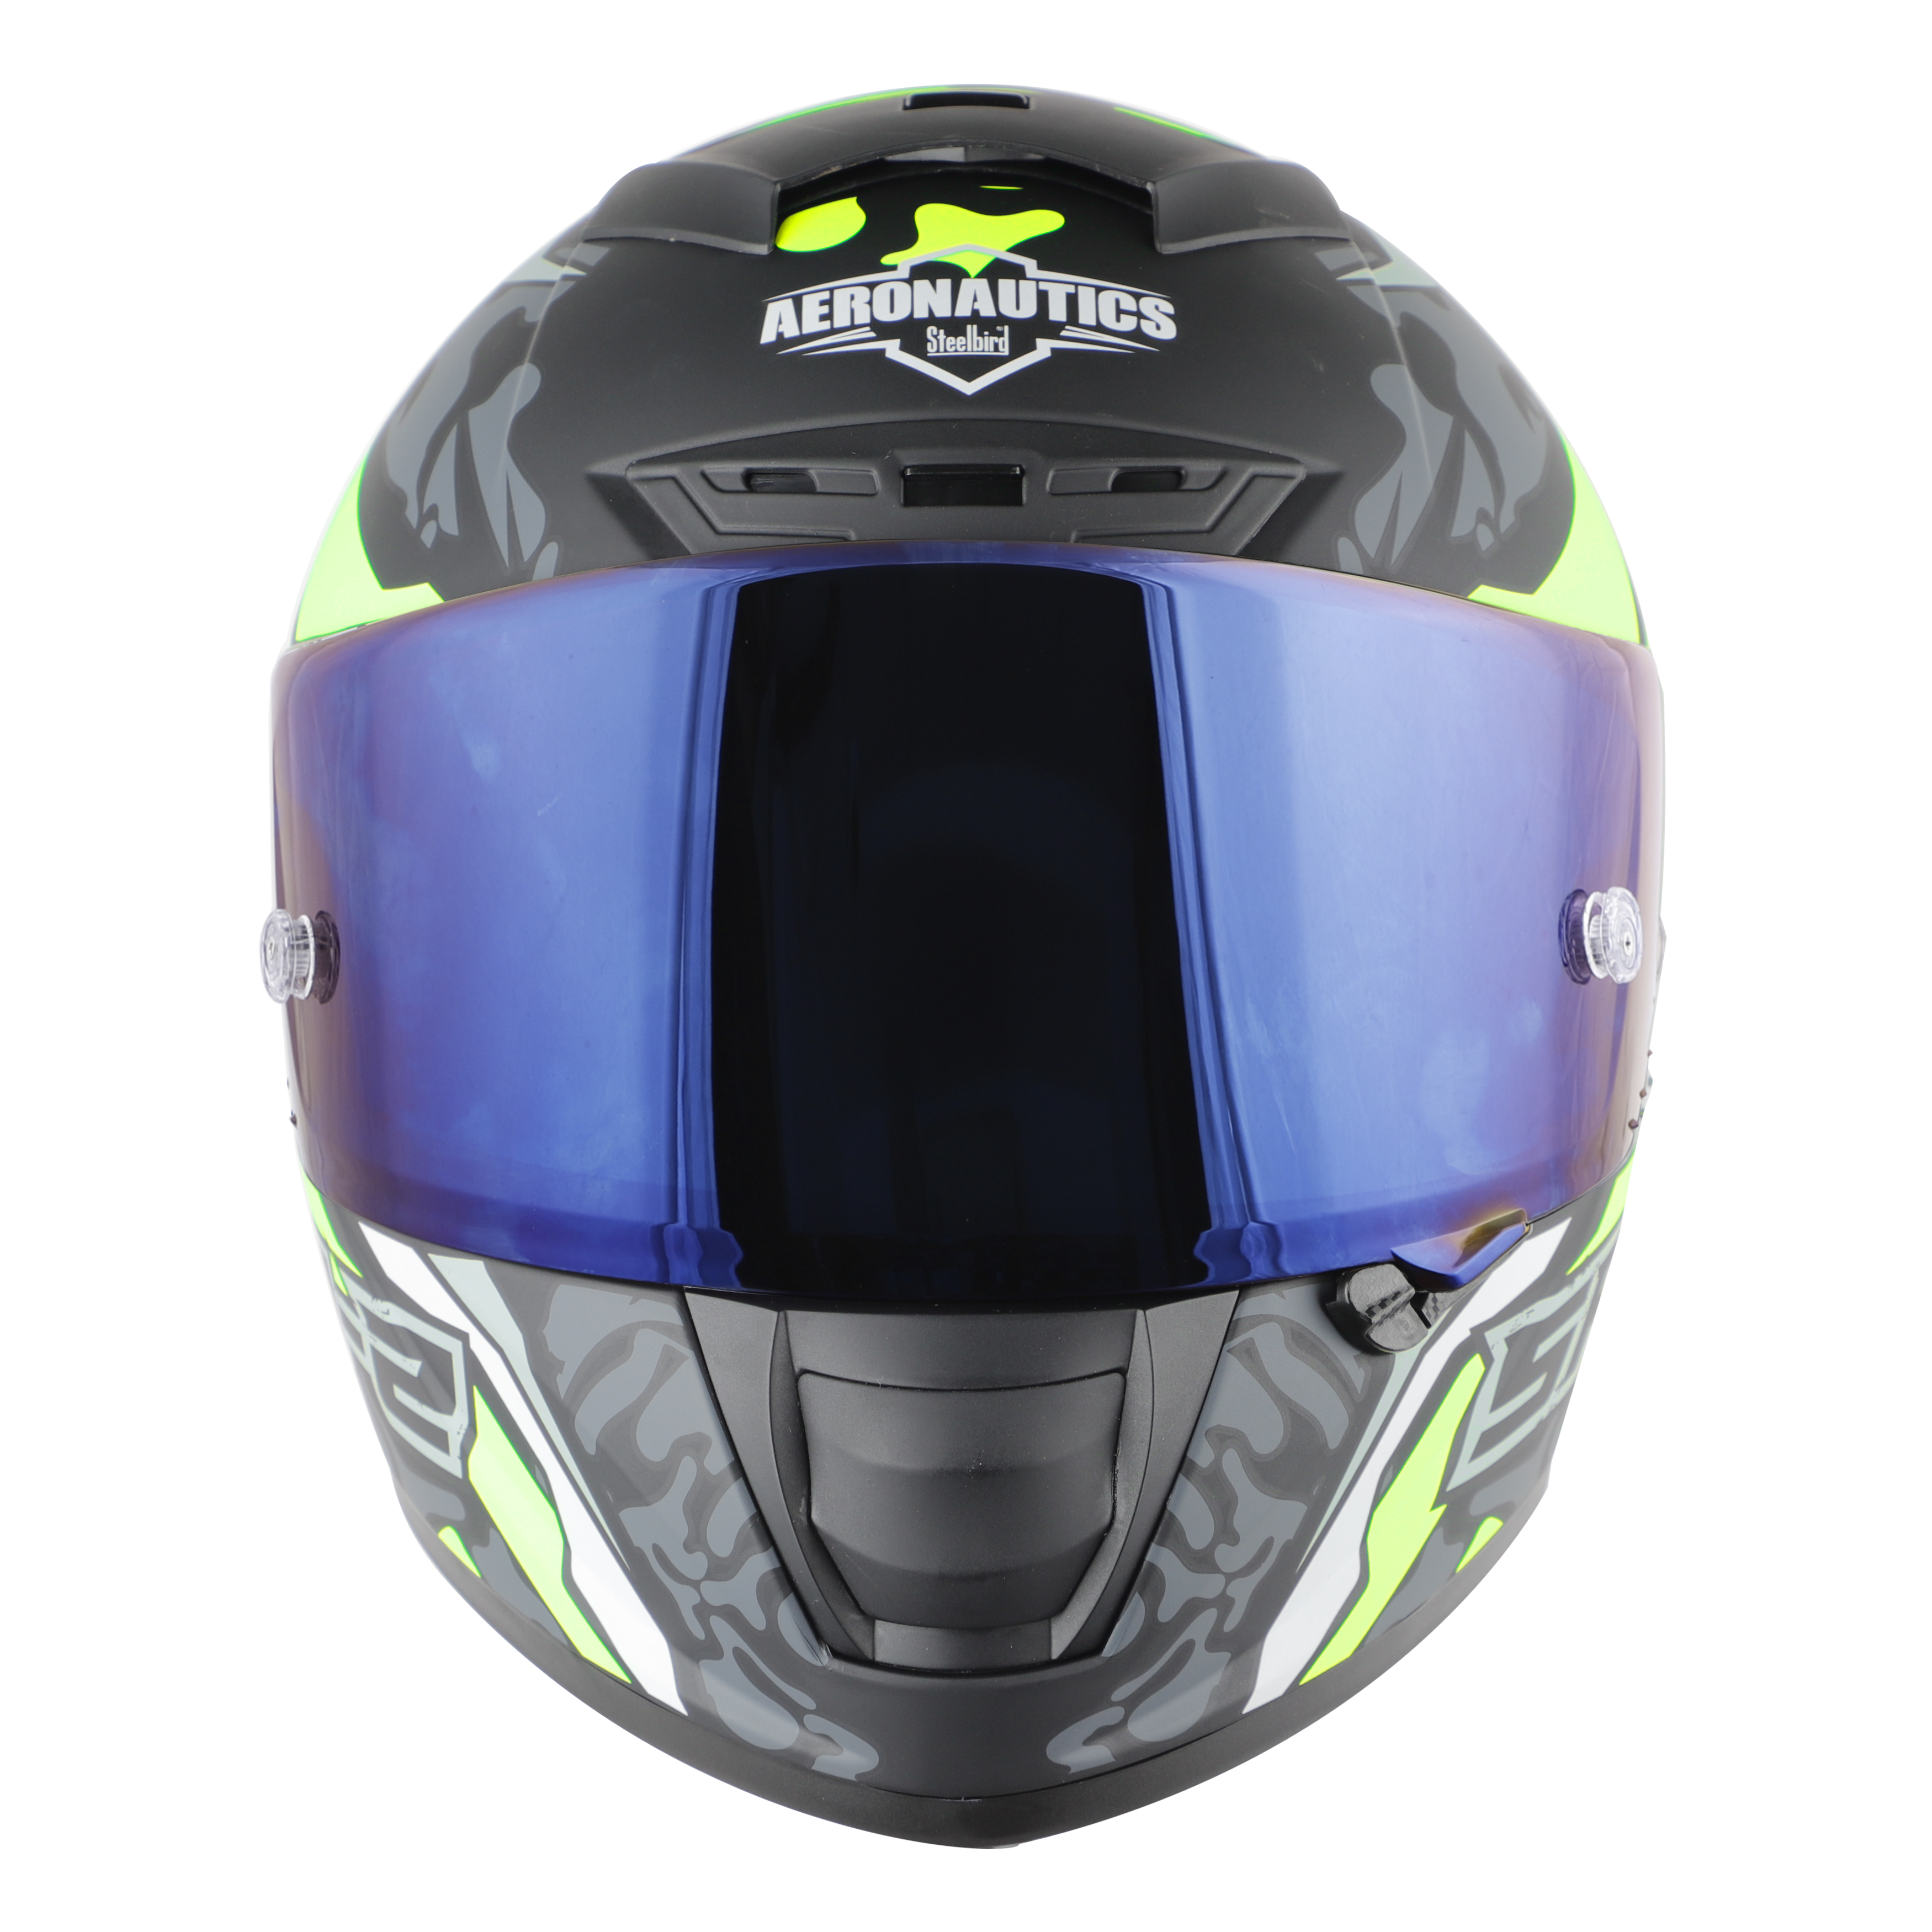 SA-2 TERMINATOR 3.0 GLOSSY BLACK WITH NEON FITTED WITH CLEAR VISOR EXTRA BLUE CHROME VISOR FREE (WITH ANTI-FOR SHIELD HOLDER)